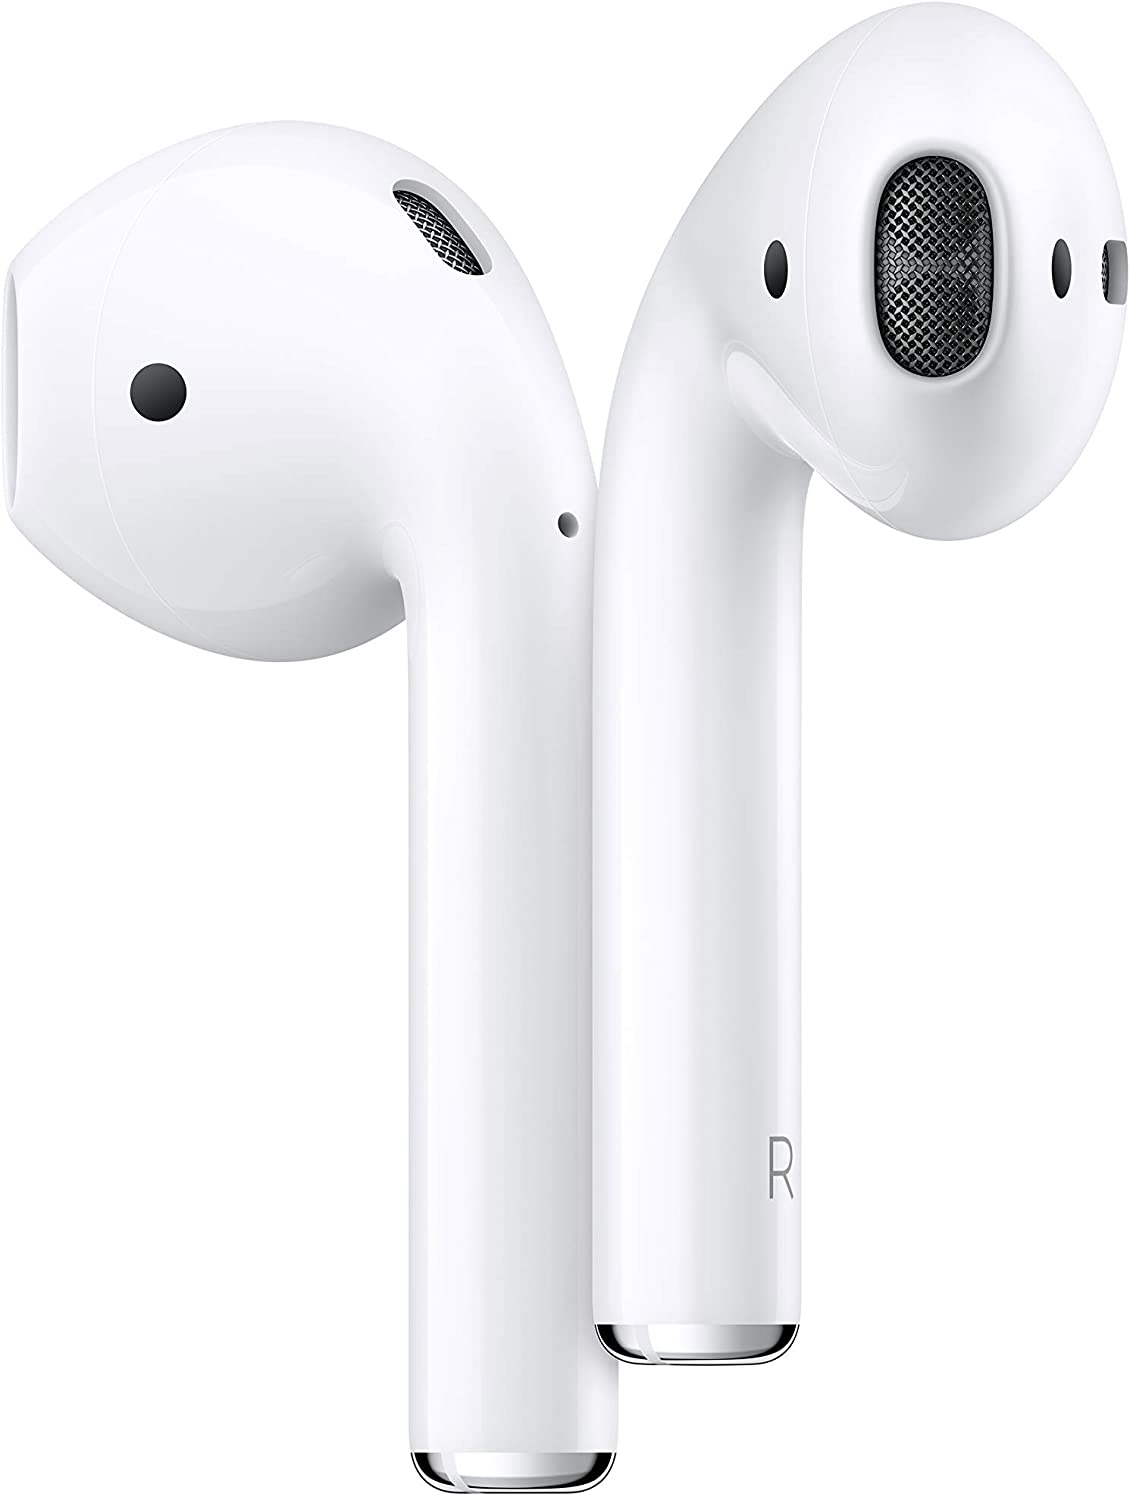 Apple AirPods 2nd Generation with Charging Case,